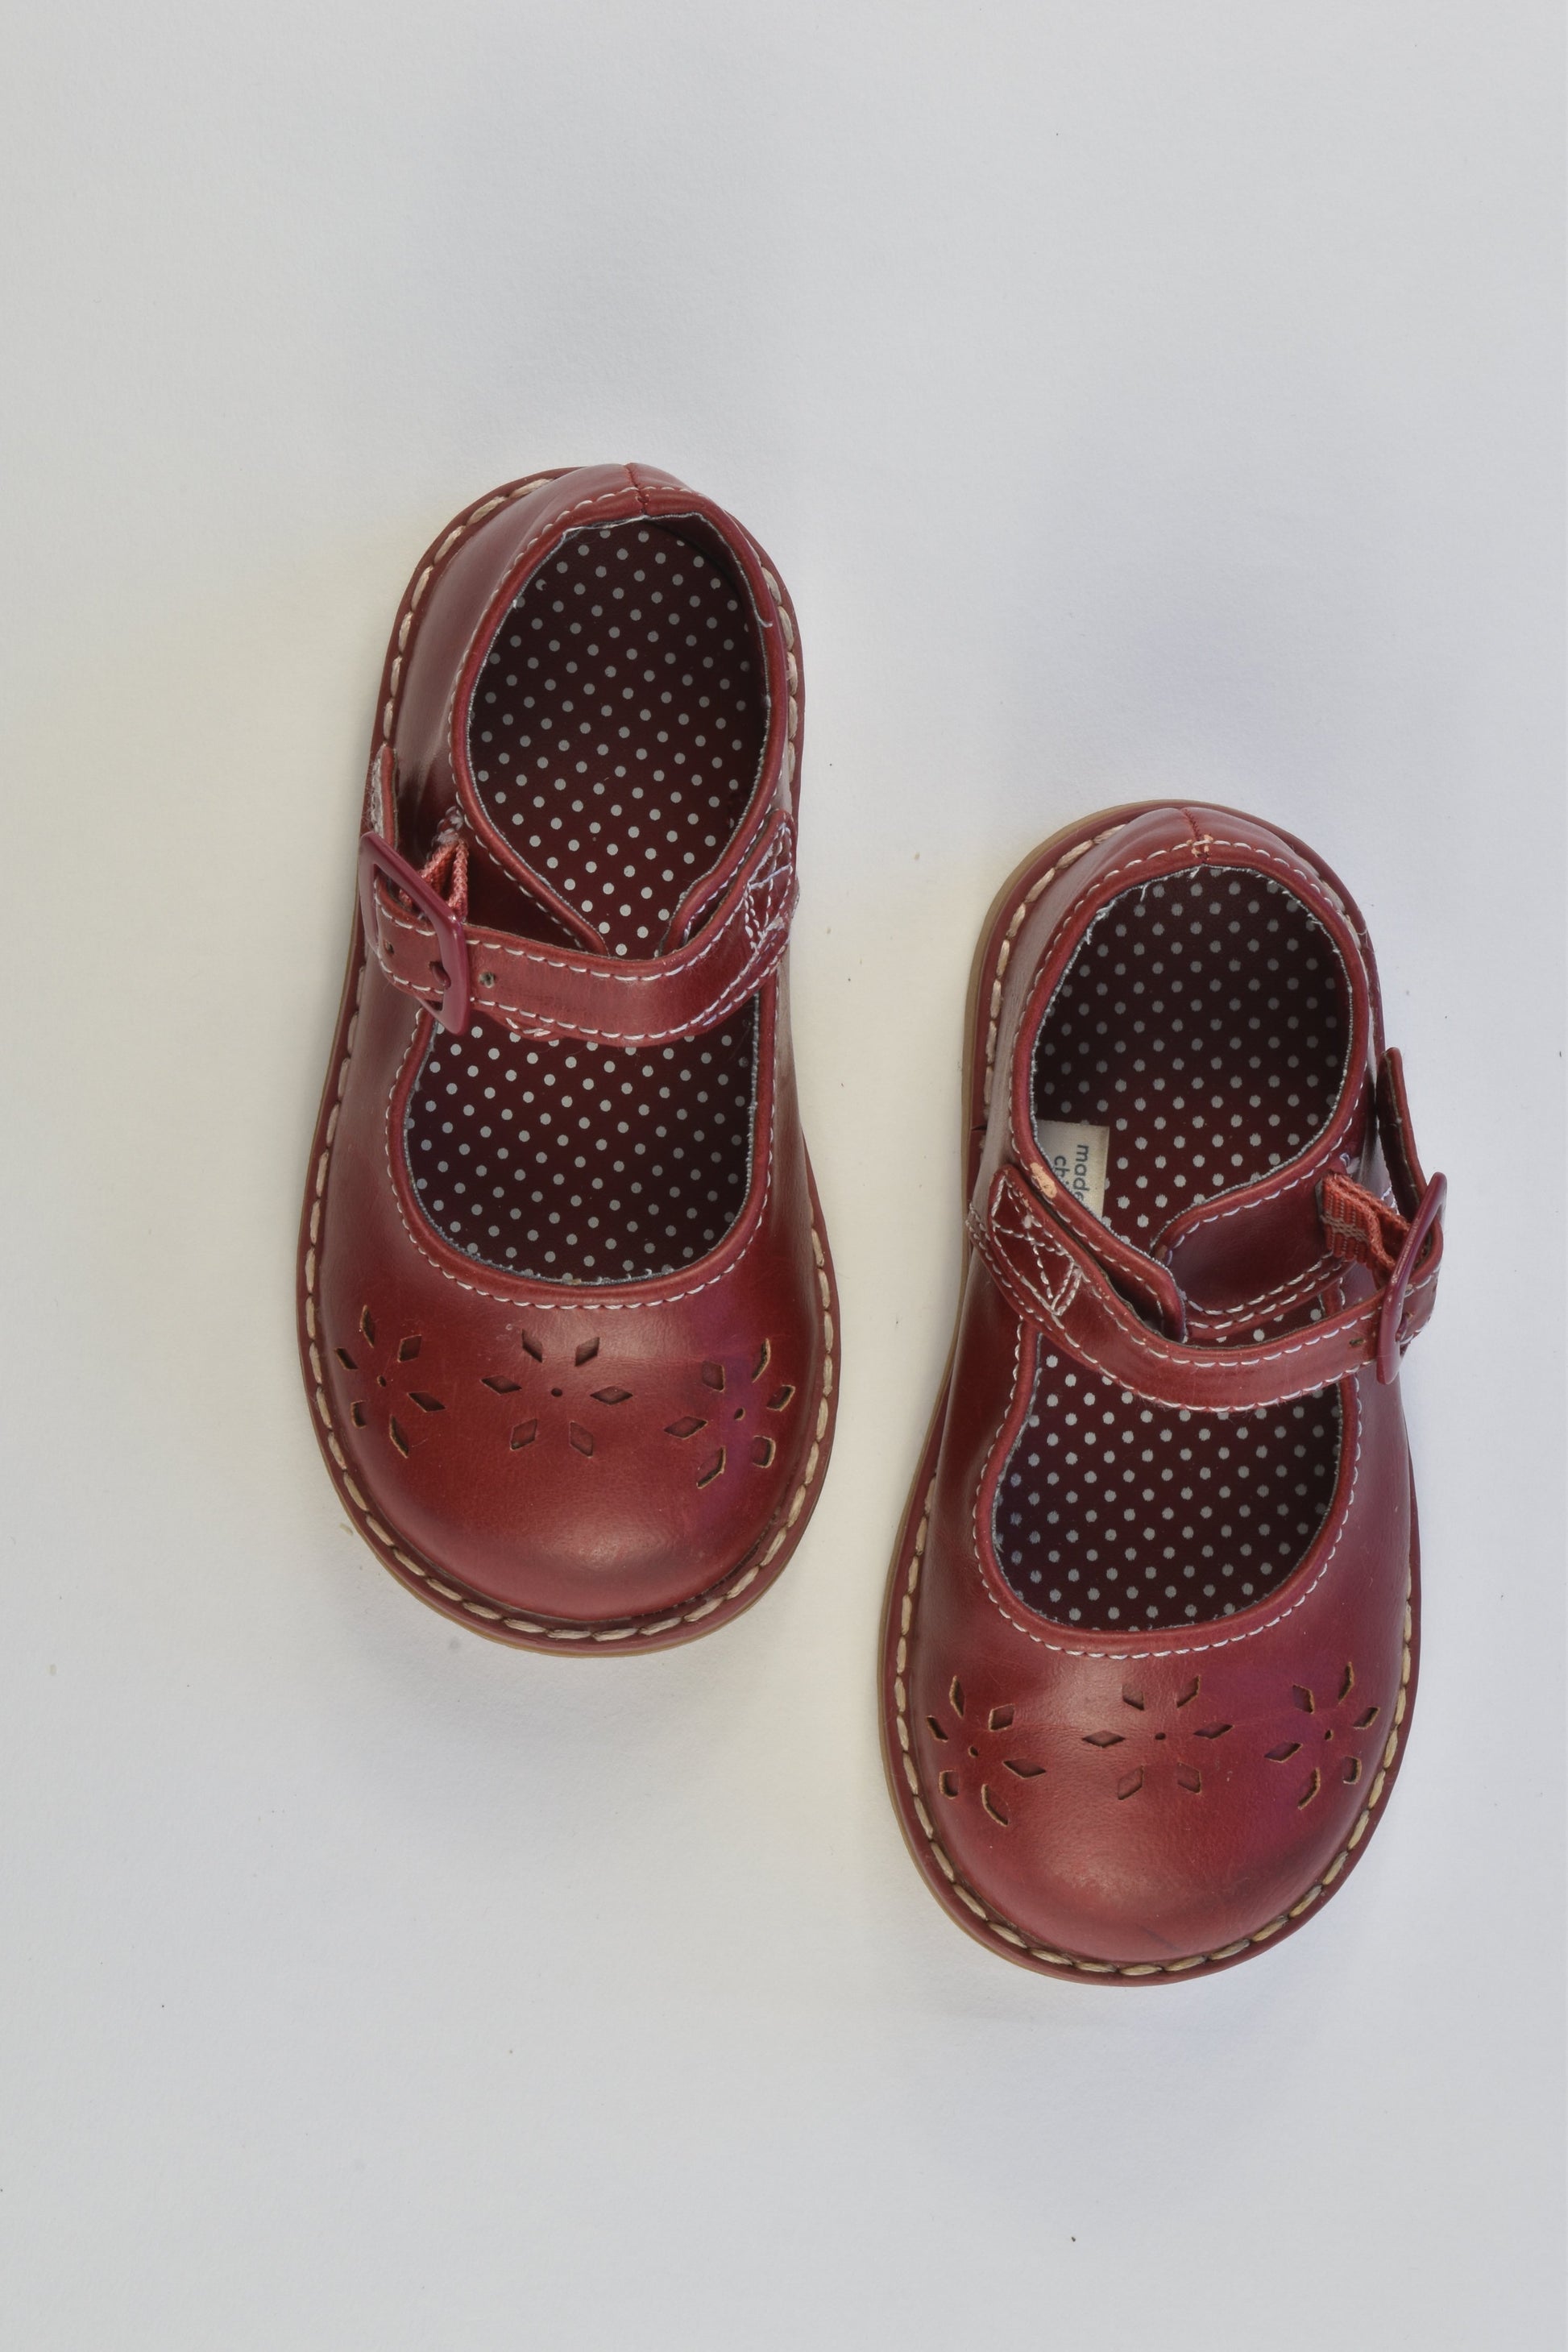 Mothercare Size UK 5 Shoes